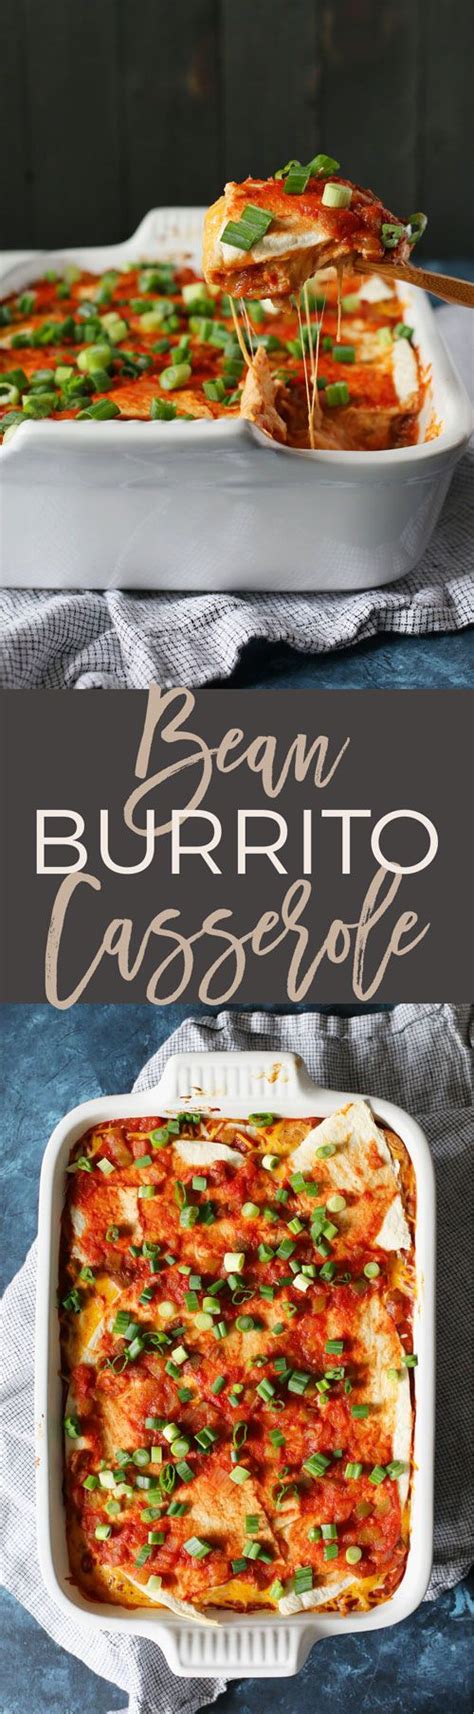 This Bean Burrito Casserole Is The Perfect Weeknight Vegetarian Freezer Meal Pull The Casserole